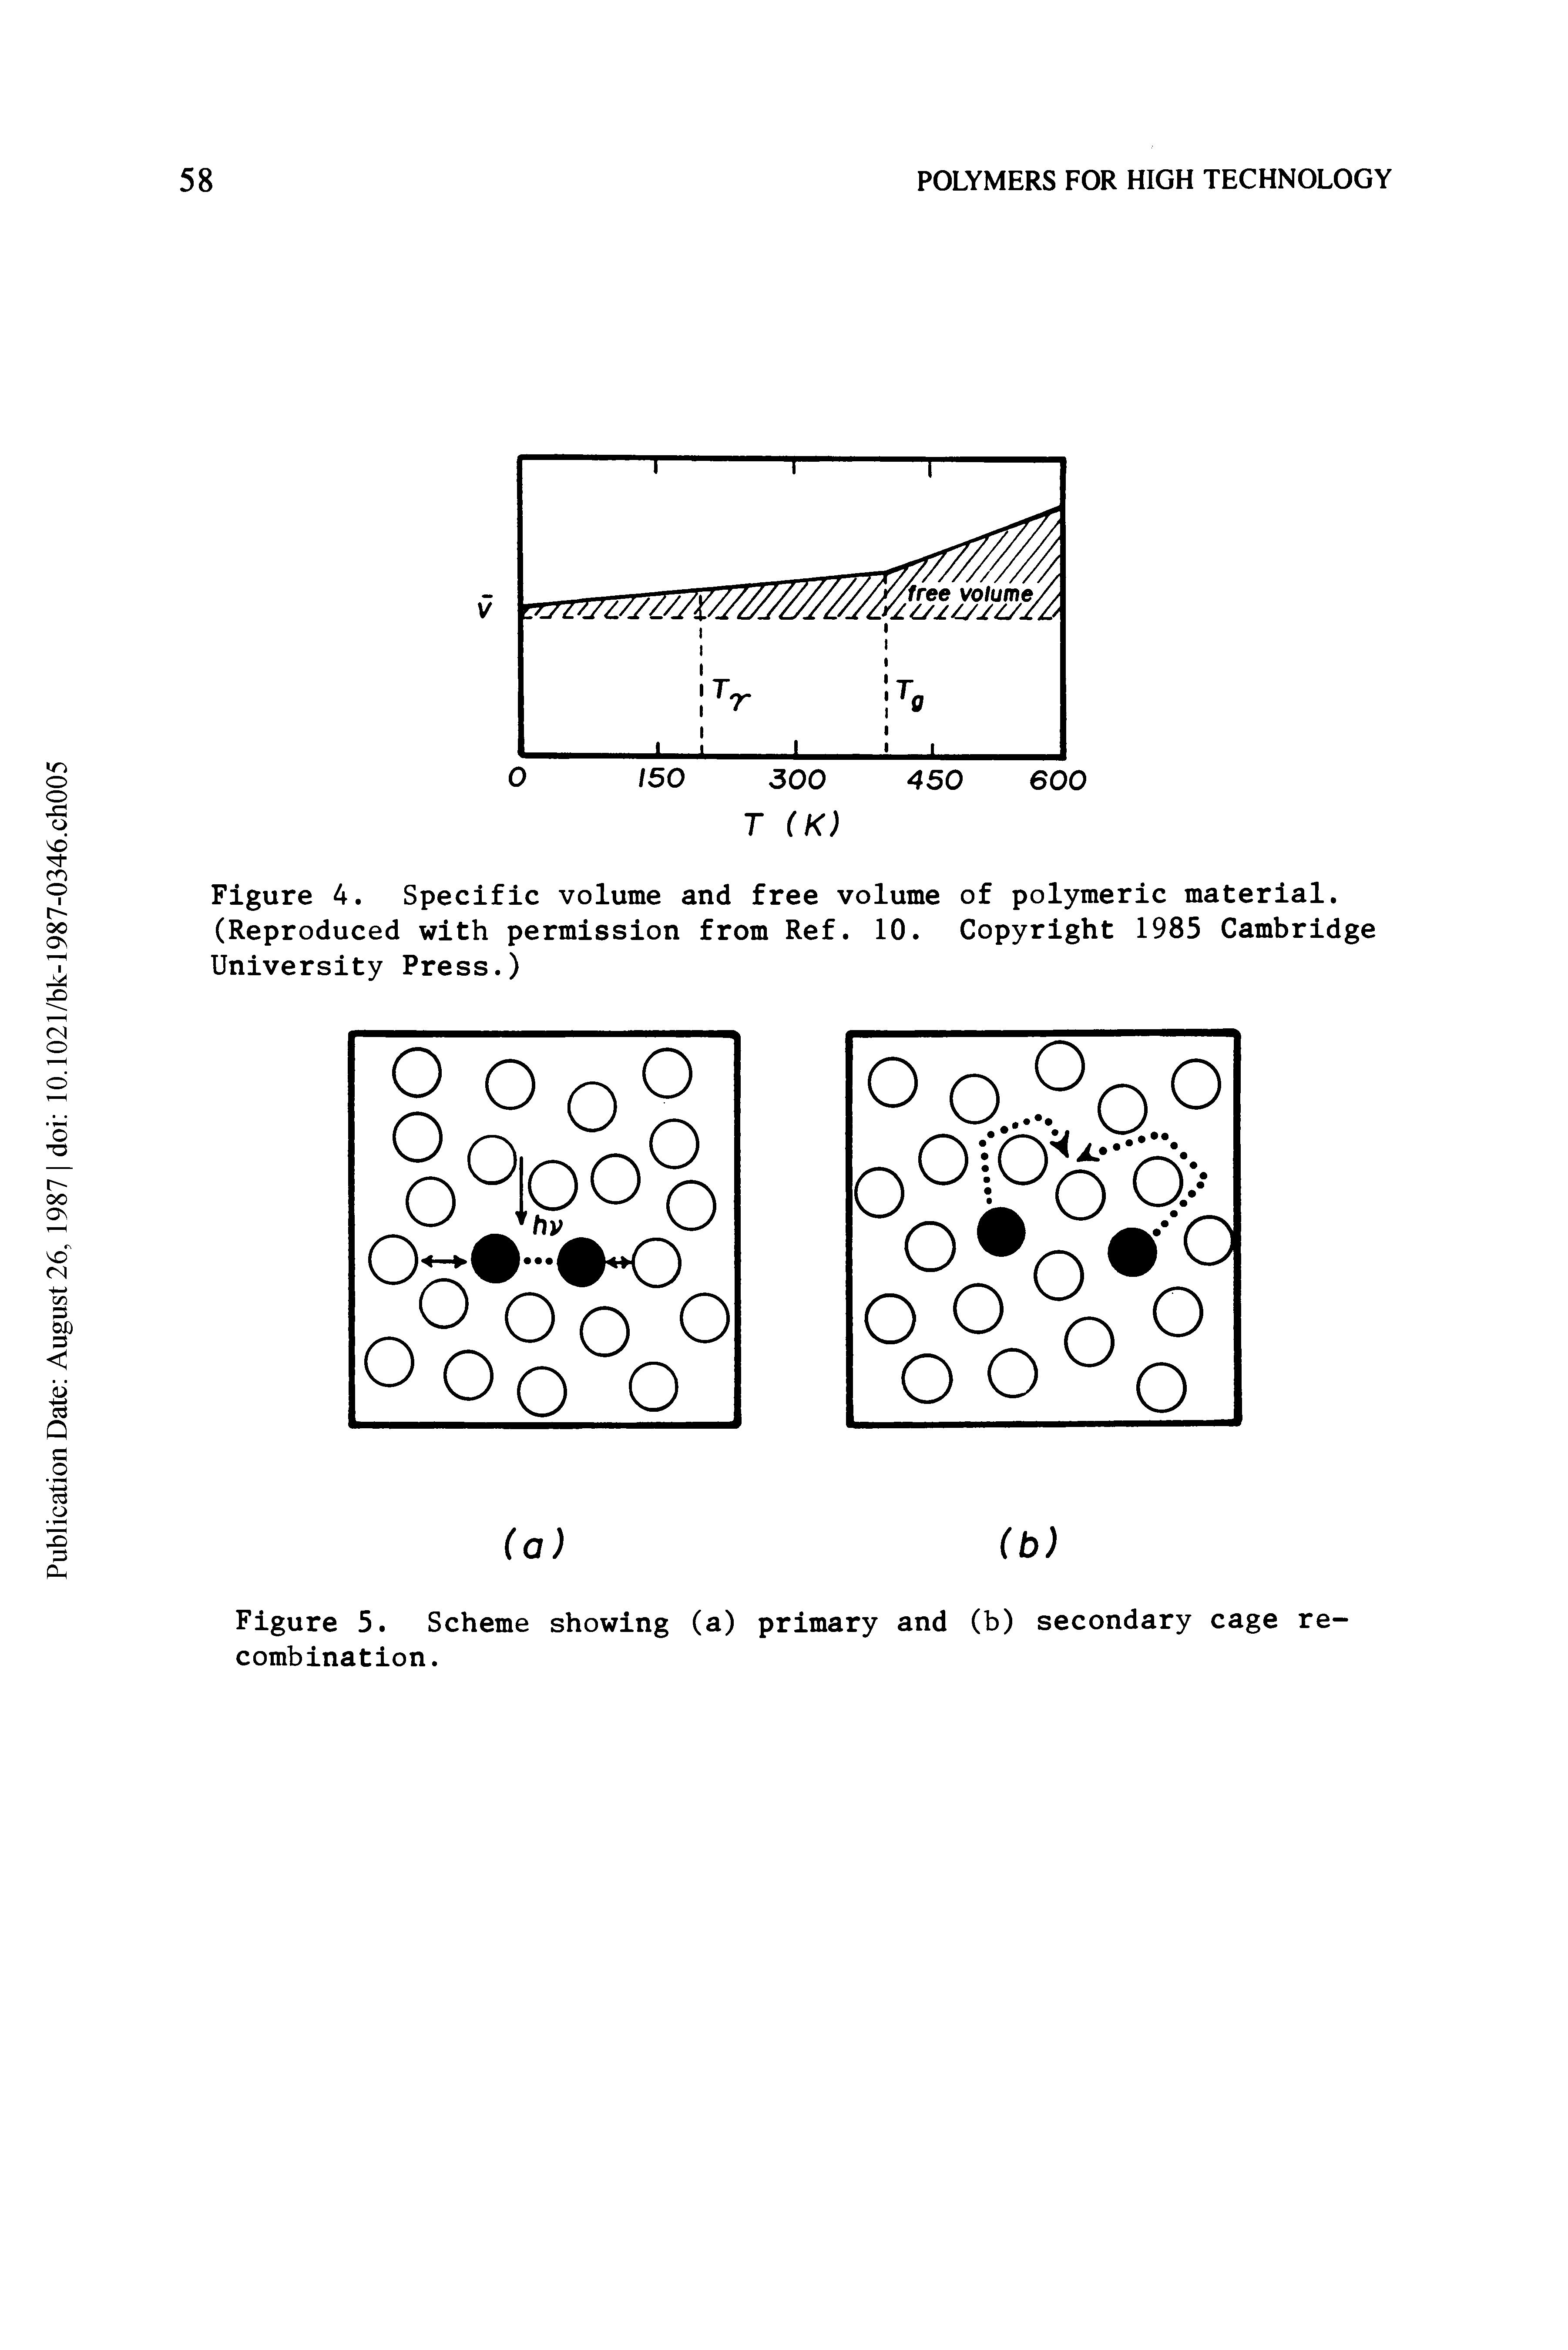 Figure 4. Specific volume and free volume of polymeric material. (Reproduced with permission from Ref. 10. Copyright 1985 Cambridge University Press.)...